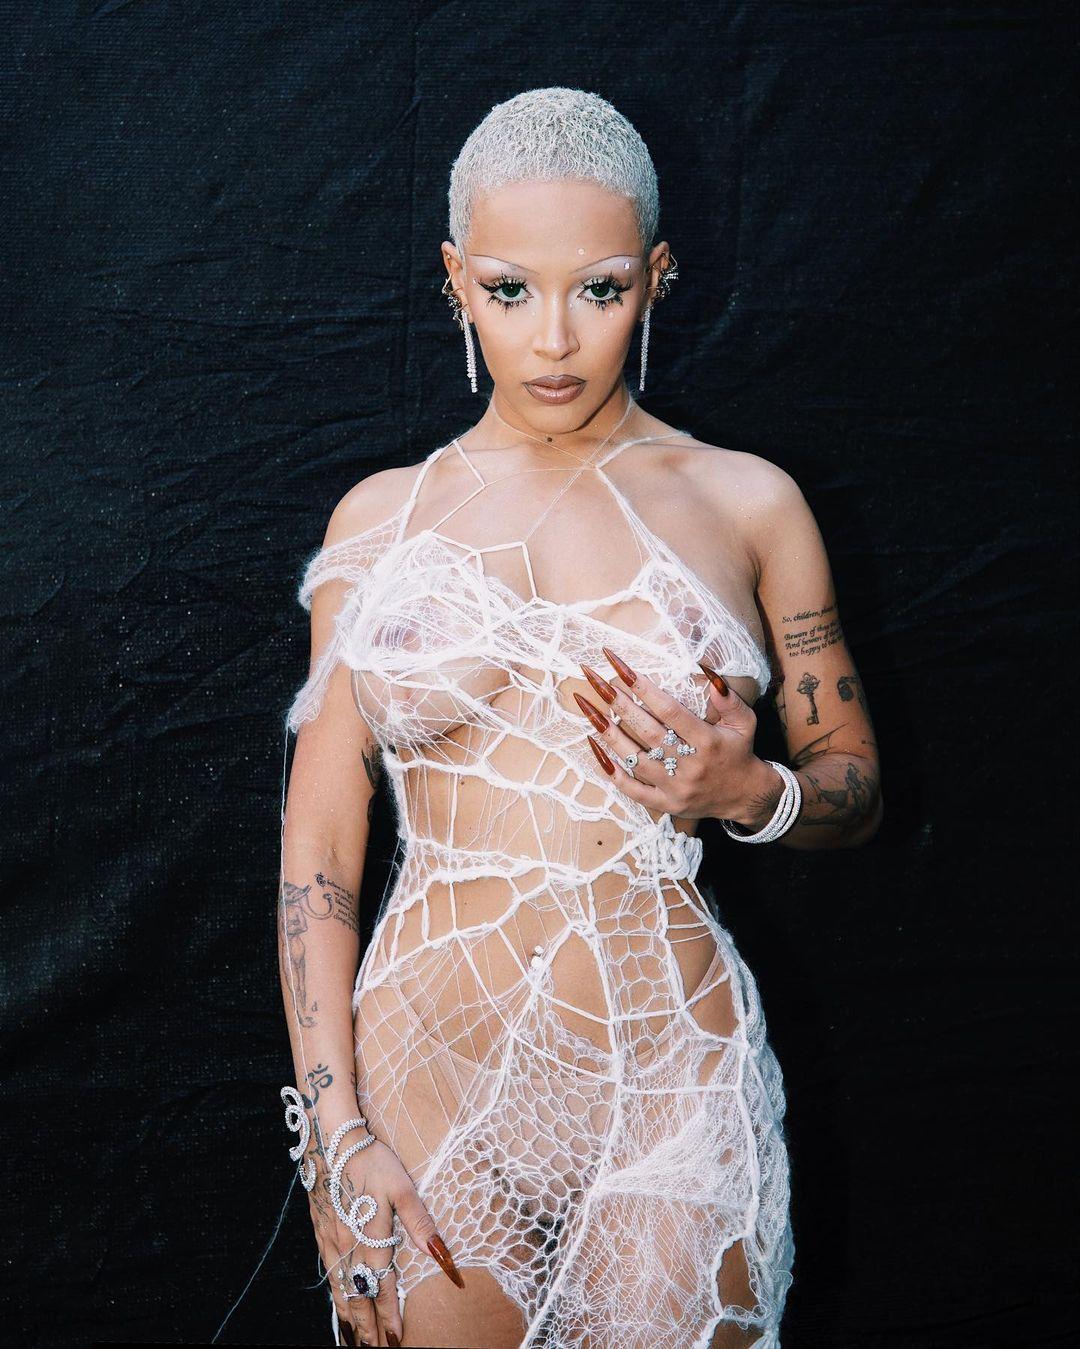 Doja Cat Fans Want To Be The Spider On Her Sheer Web Ensemble At The VMA's